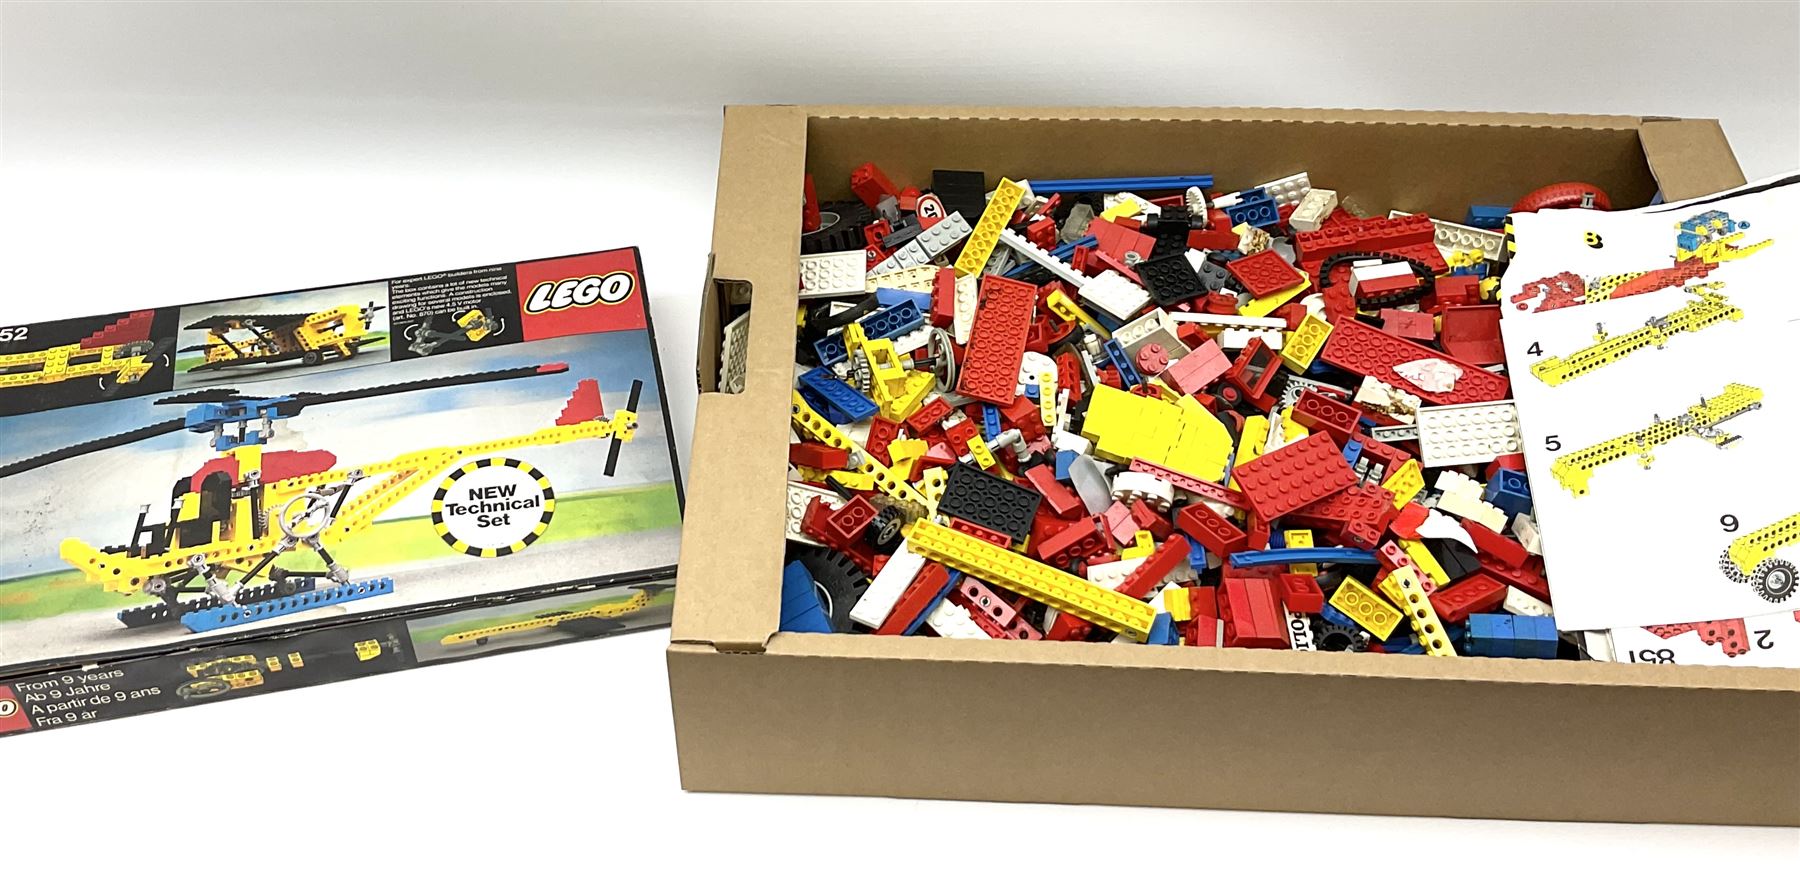 Lego - Technical set 852 for a helicopter